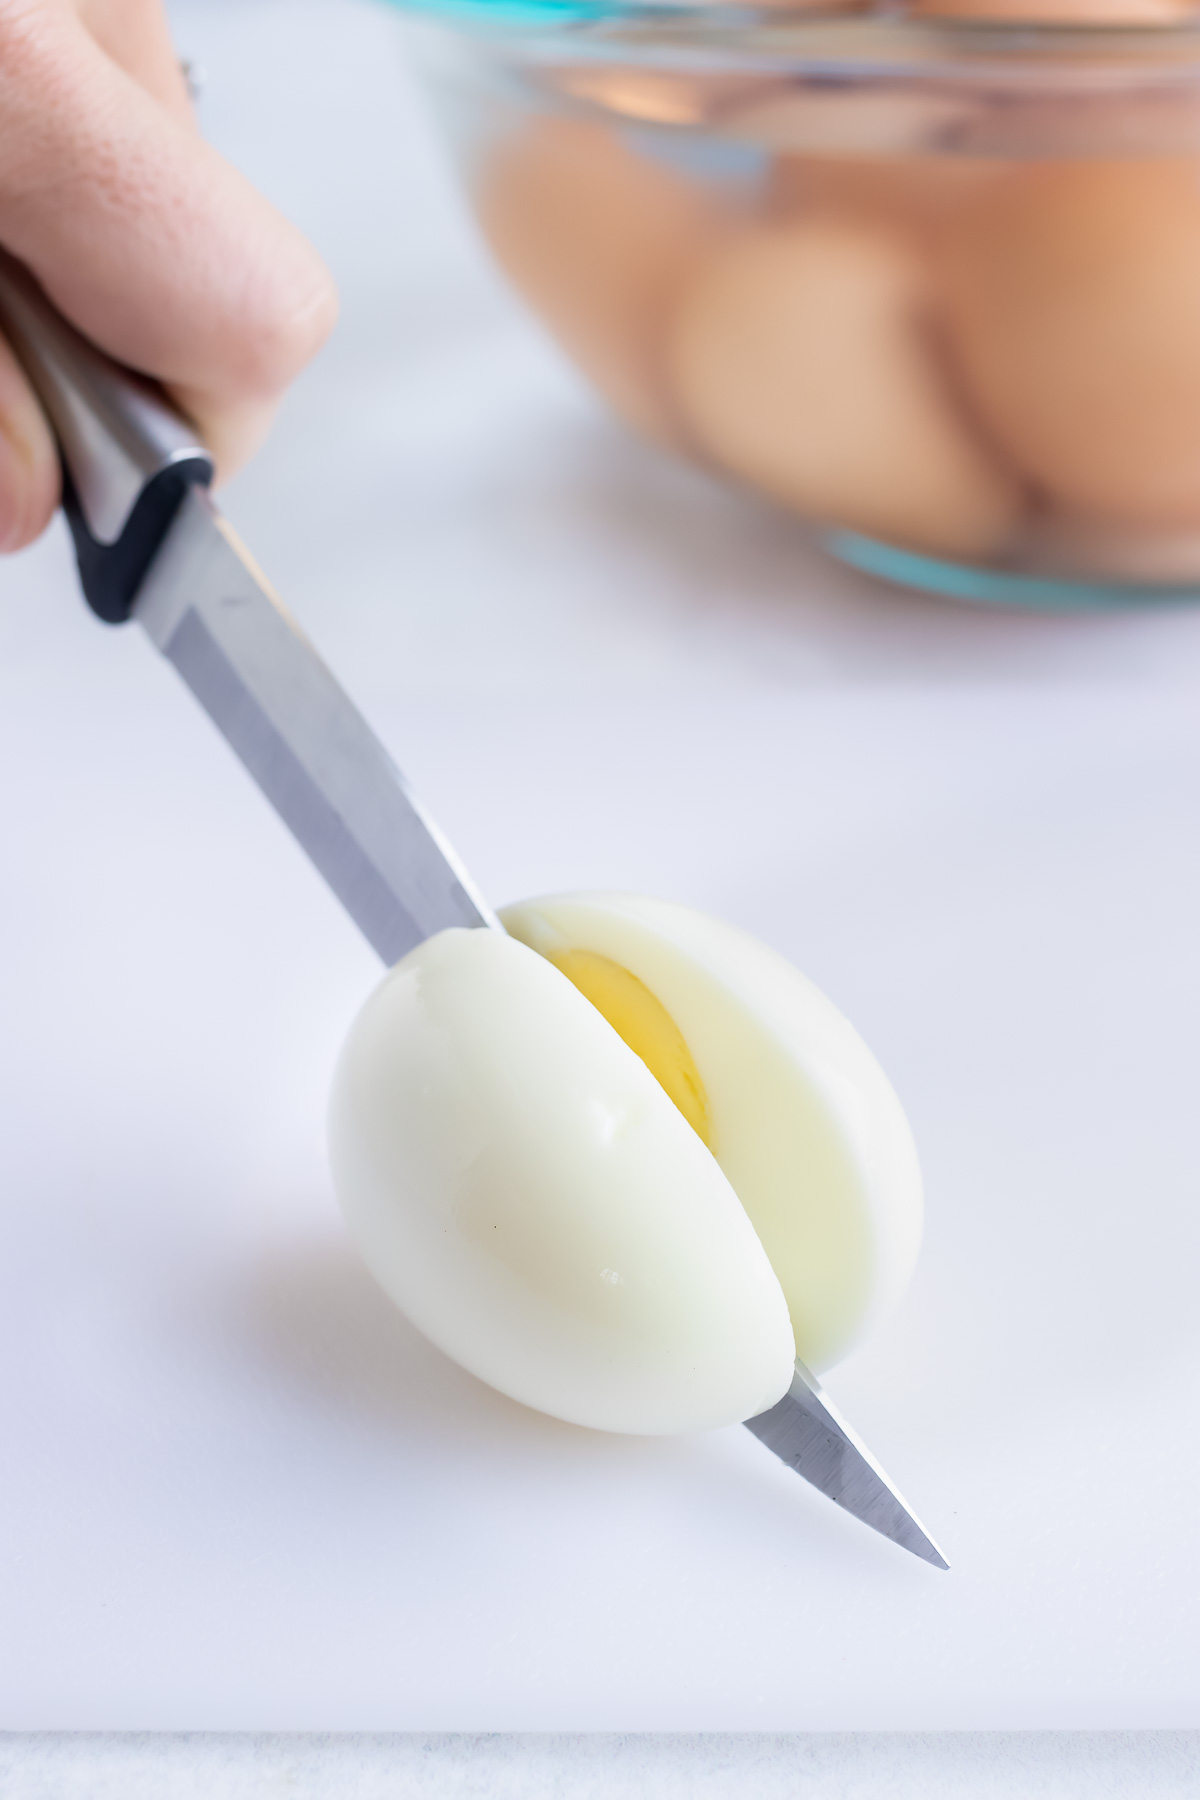 A hard-boiled egg is cut in half.